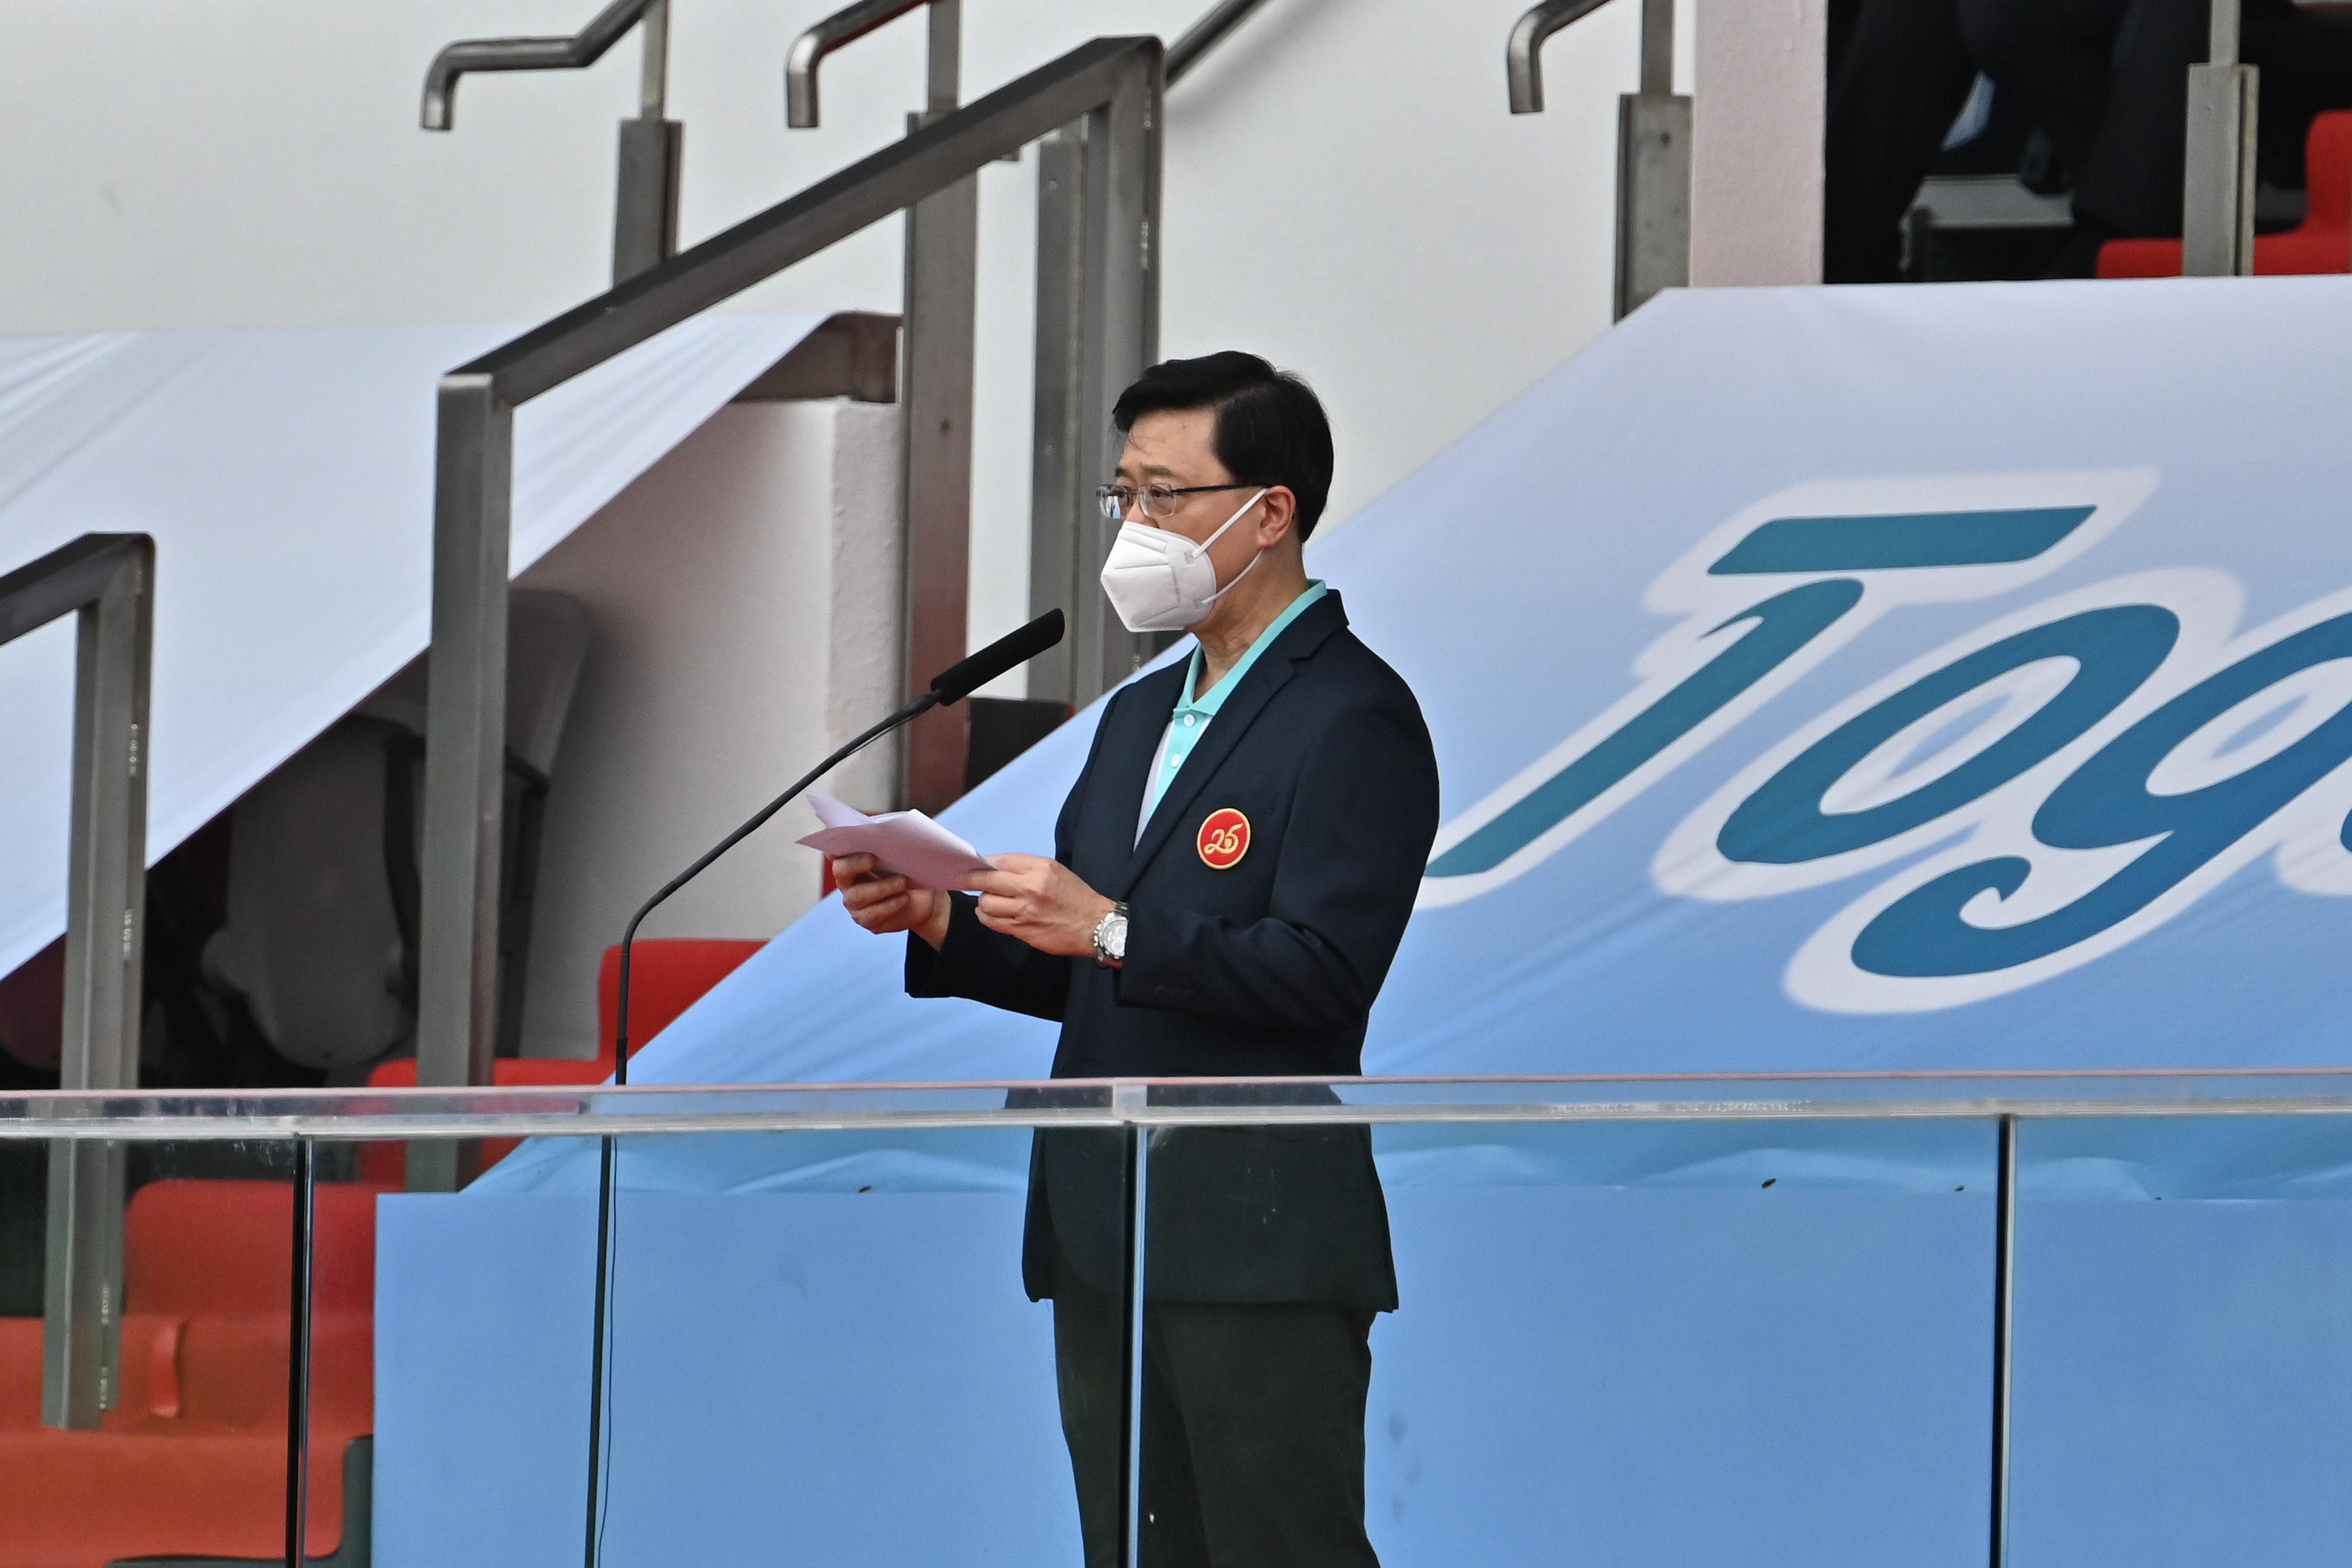 The Chief Executive, Mr John Lee, speaks at the "Together We Prosper" Grand Parade by Disciplined Services and Youth Groups for Celebrating the 73rd Anniversary of the Founding of the People's Republic of China and the 25th Anniversary of the Establishment of the Hong Kong Special Administrative Region today (September 24).